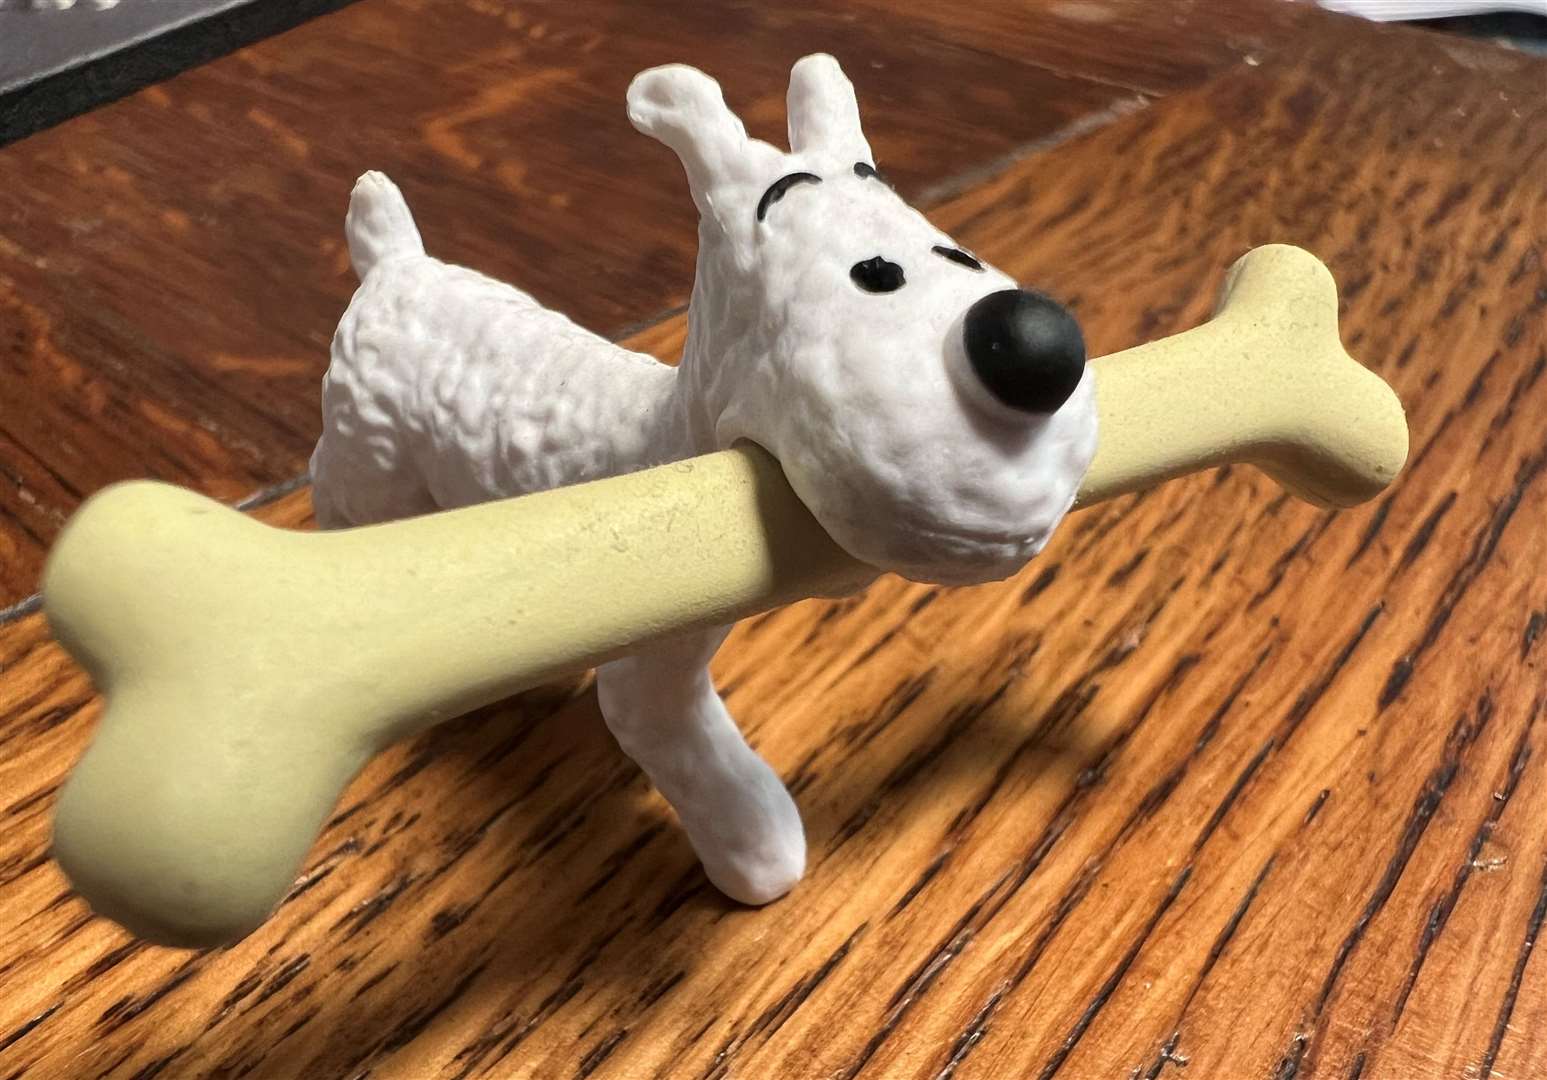 Steve's parting gift...Tintin's Snowy...a dog with a bone